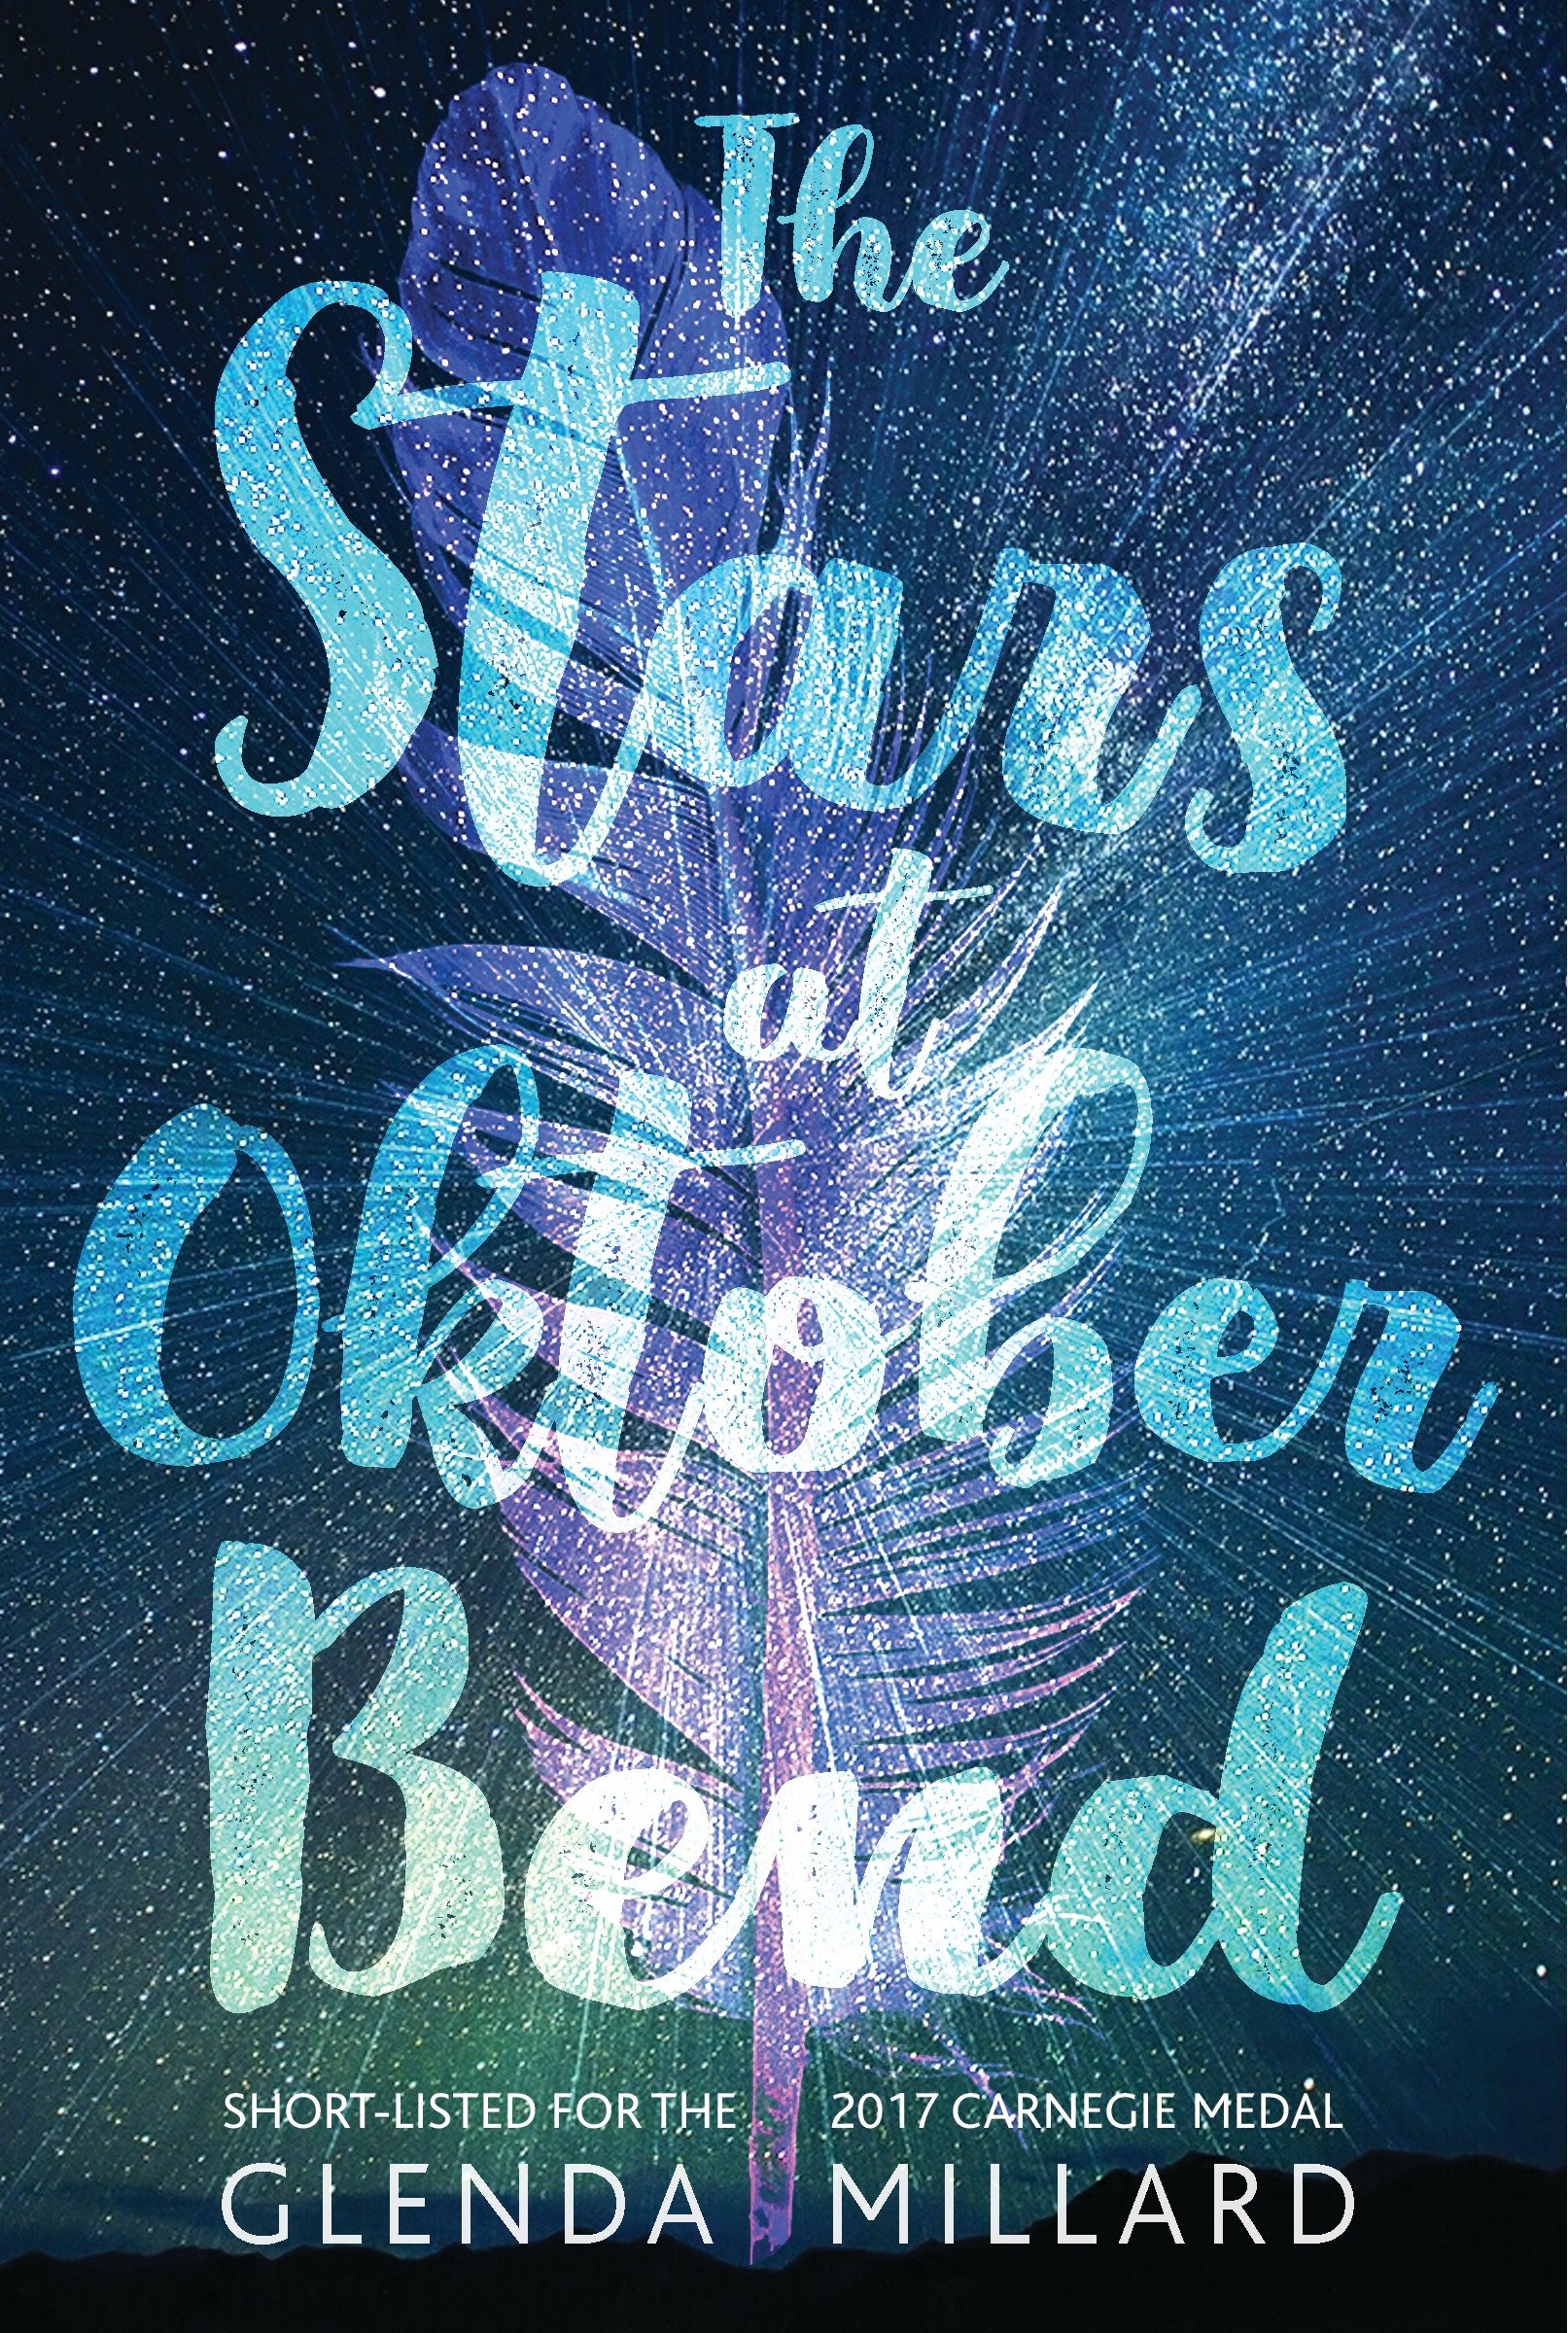 The Stars At Oktober Bend (Hardcover Book)